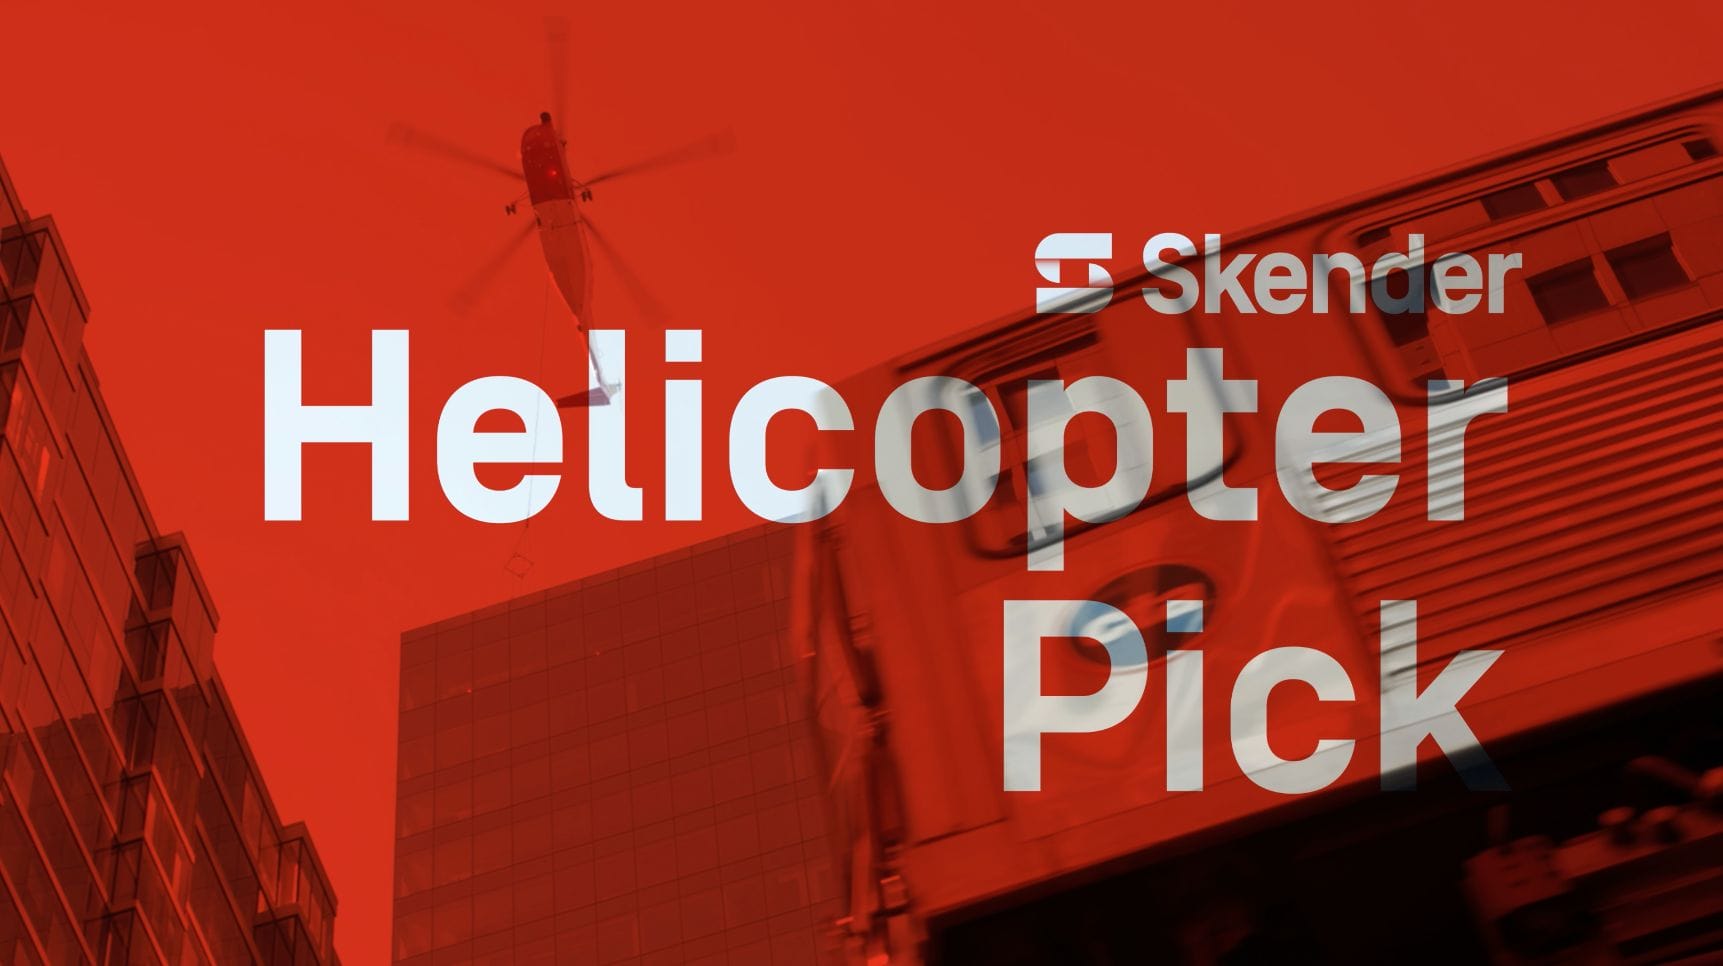 Helicopter Pick